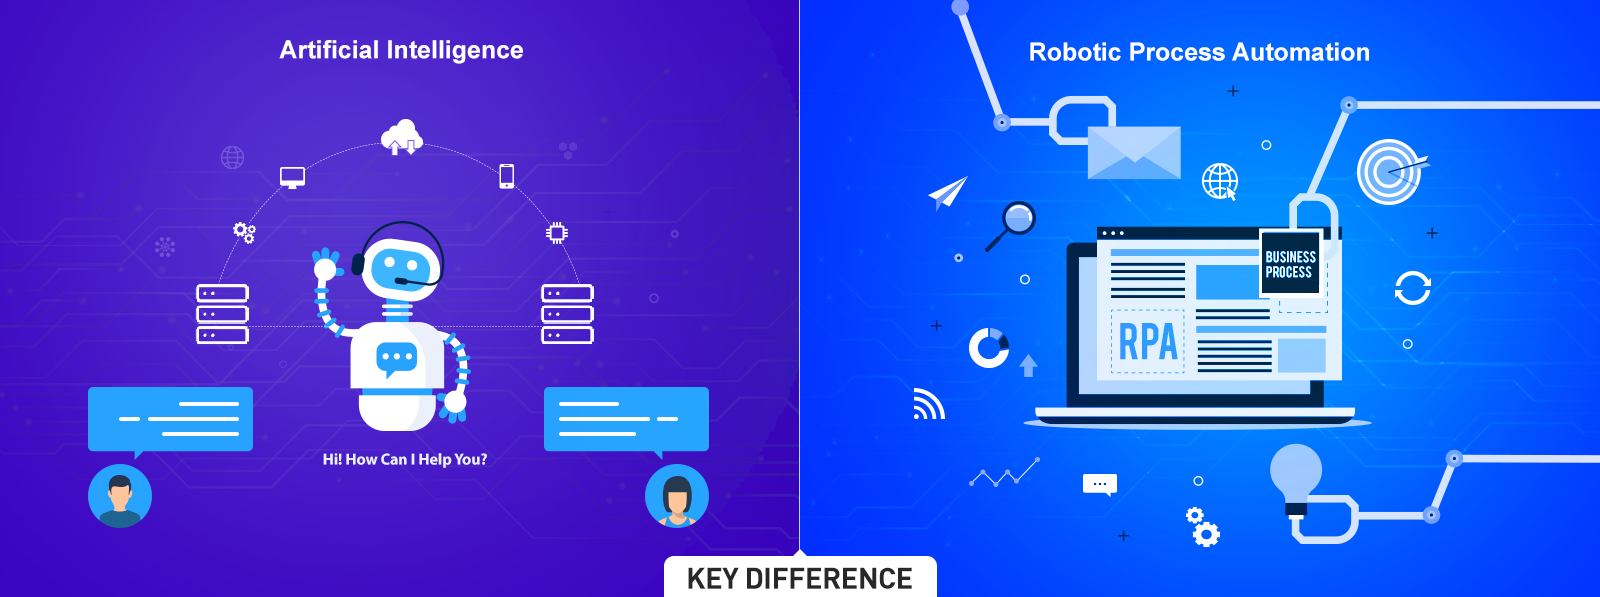 Robotic Process Automation Machine Learning: What's Difference?